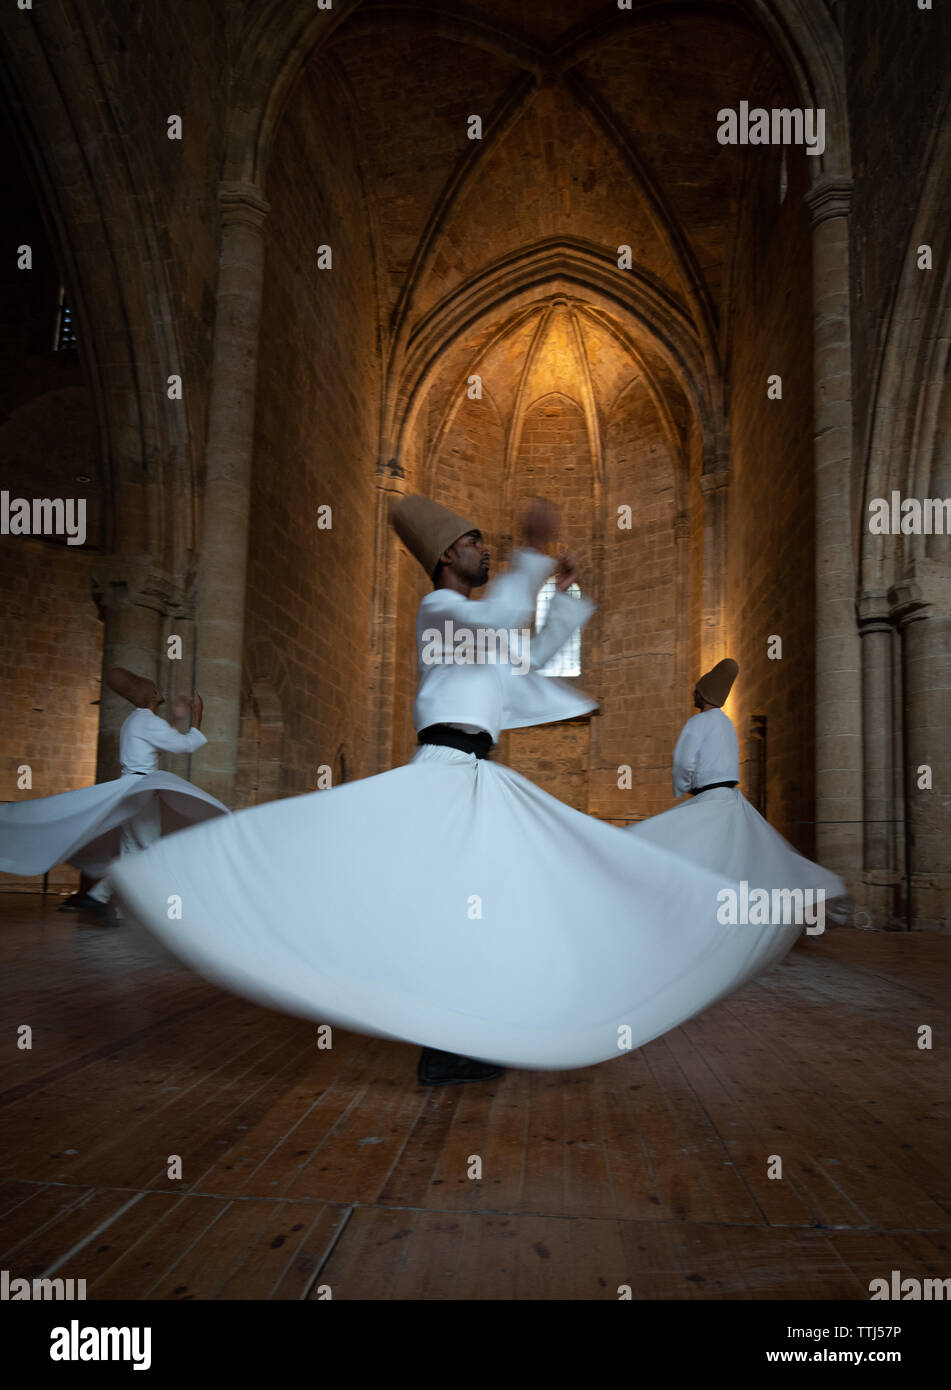 Nicosia, Cyprus, June 5 2019: Group of Dervishes performing the traditional and religious whirling dance or Sufi whirling Stock Photo